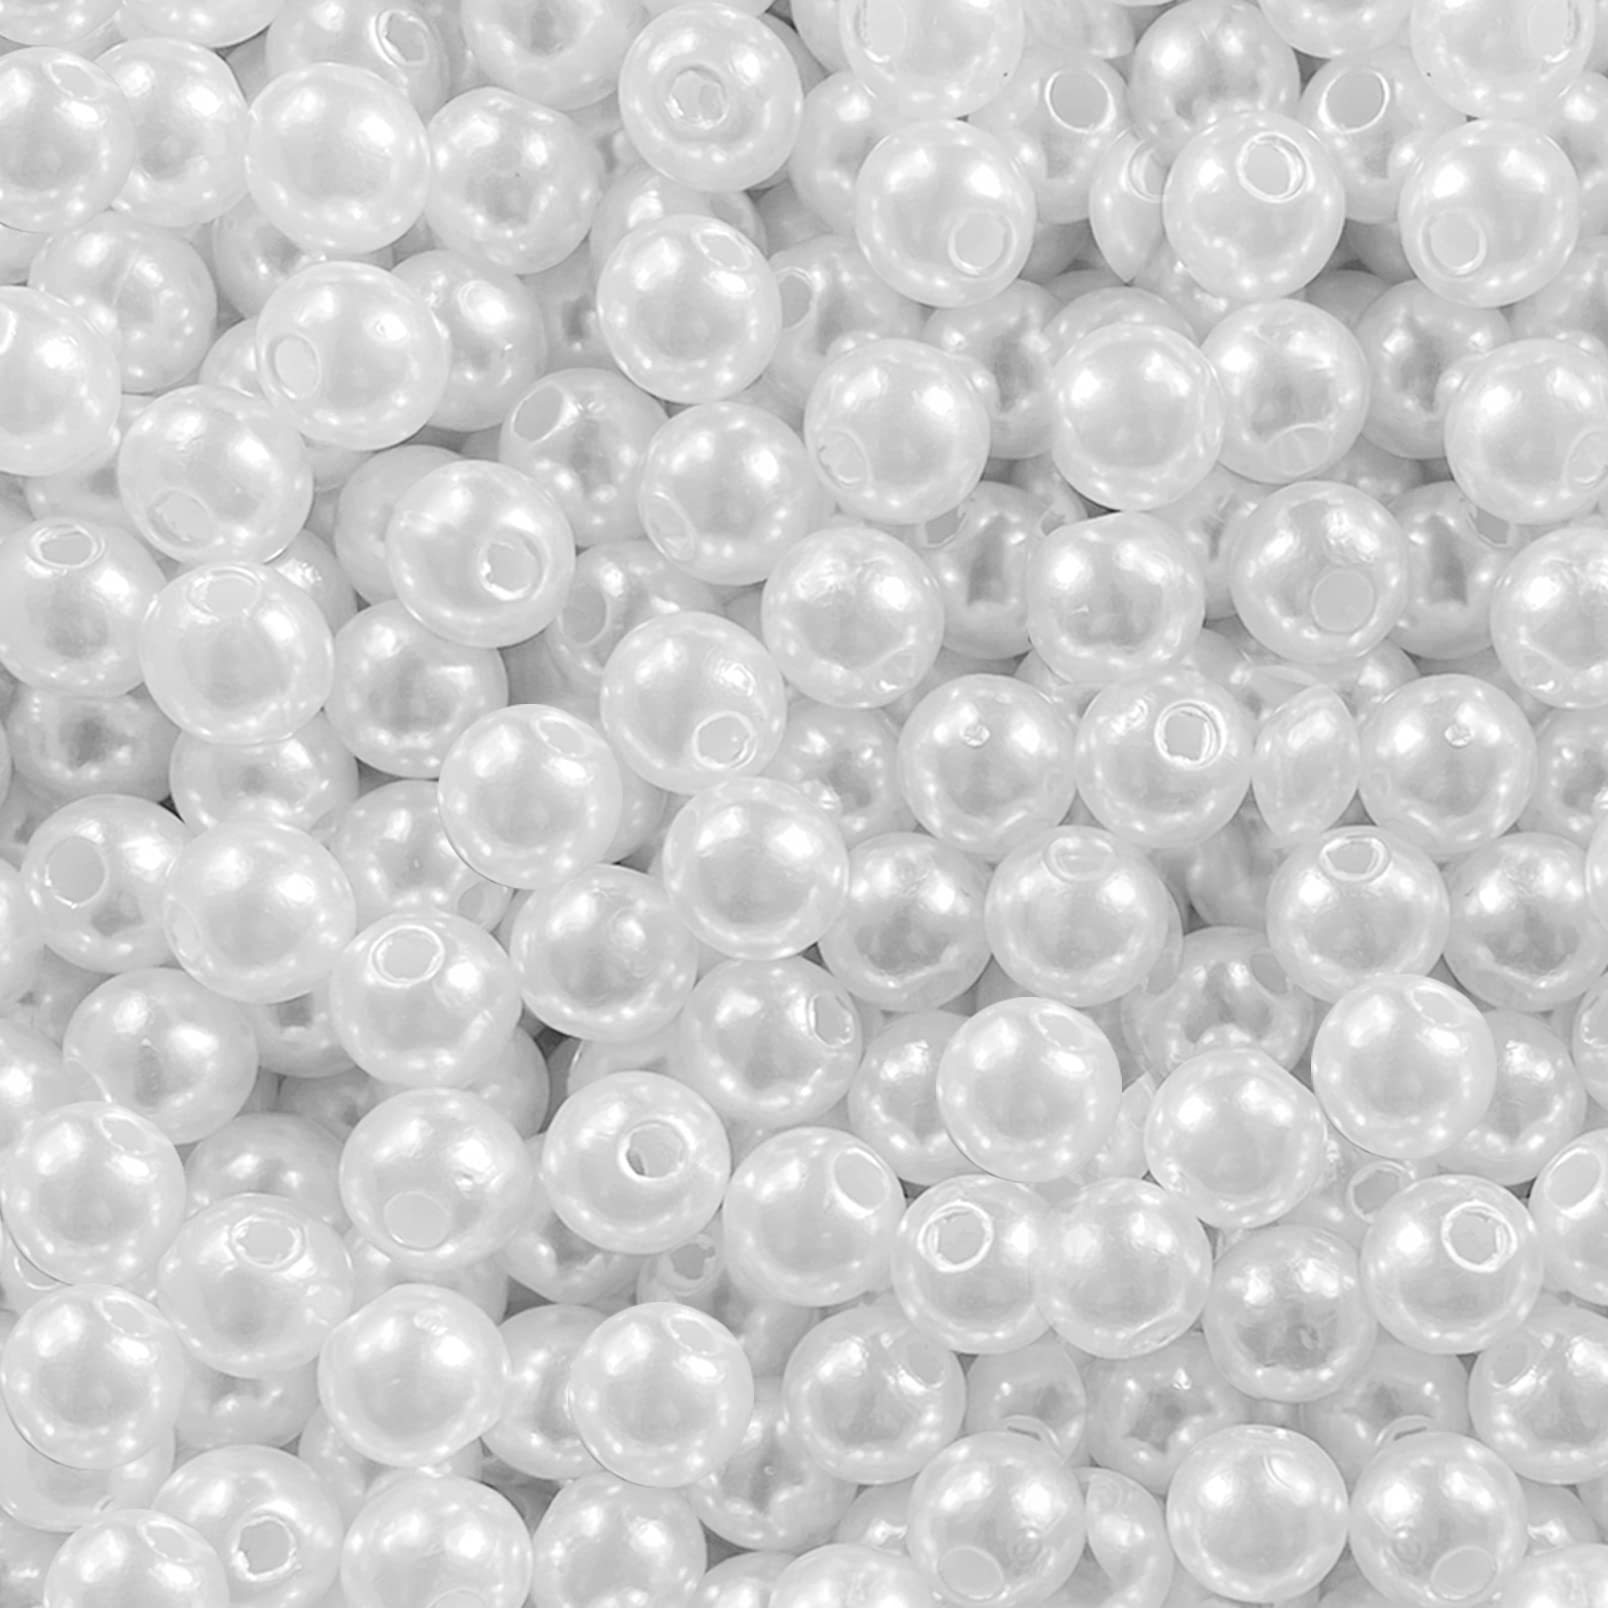 HILELIFE Pearl Beads for Jewelry Making - 1000 PcS 8mm White Pearls for Jewelry Making, Pearls for crafts, Round Loose Pearls Be